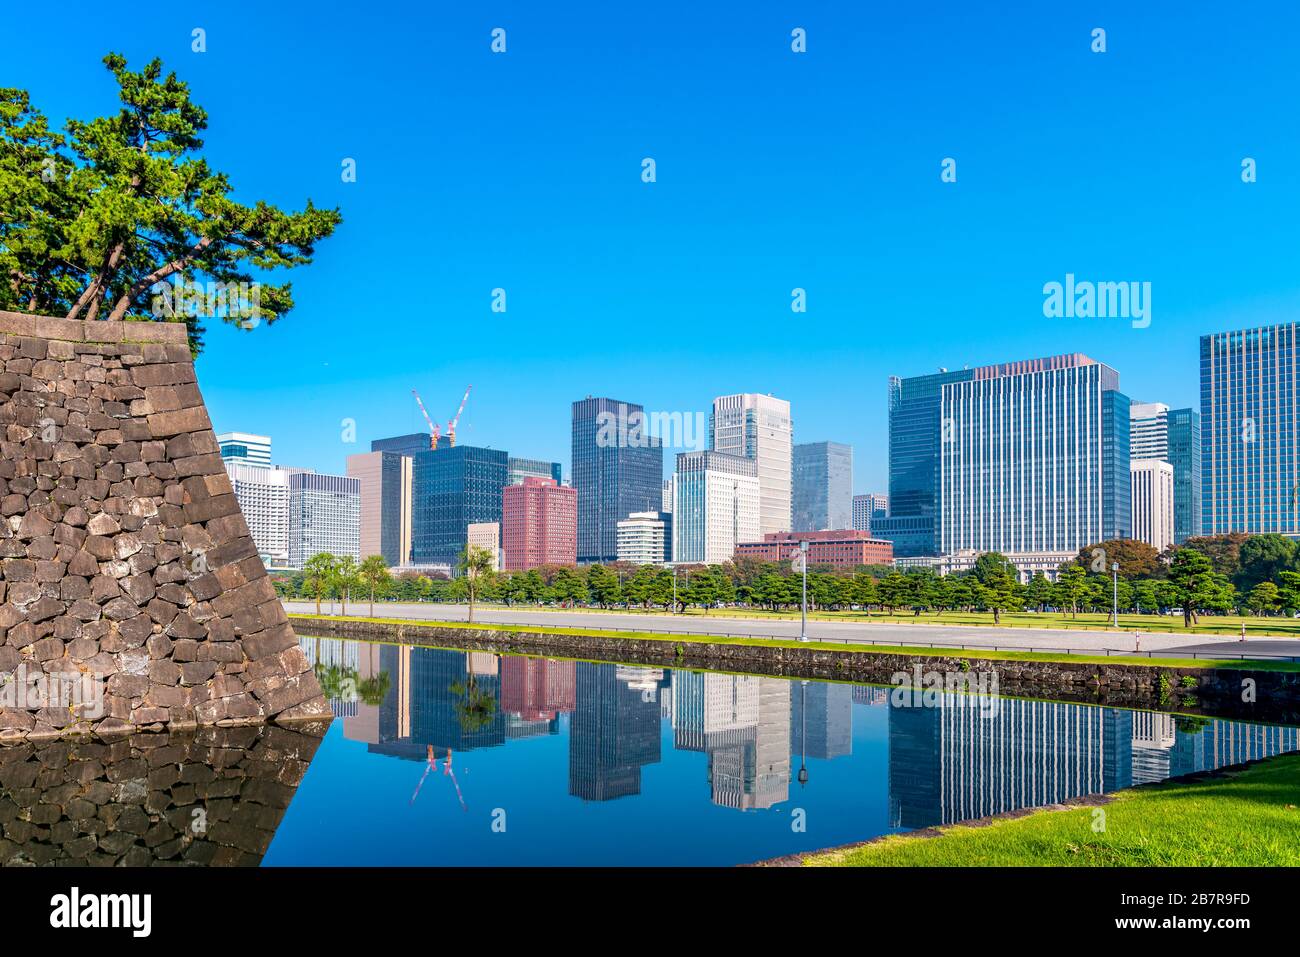 corner of the imperial palace with mordern buildings, Japan Stock Photo